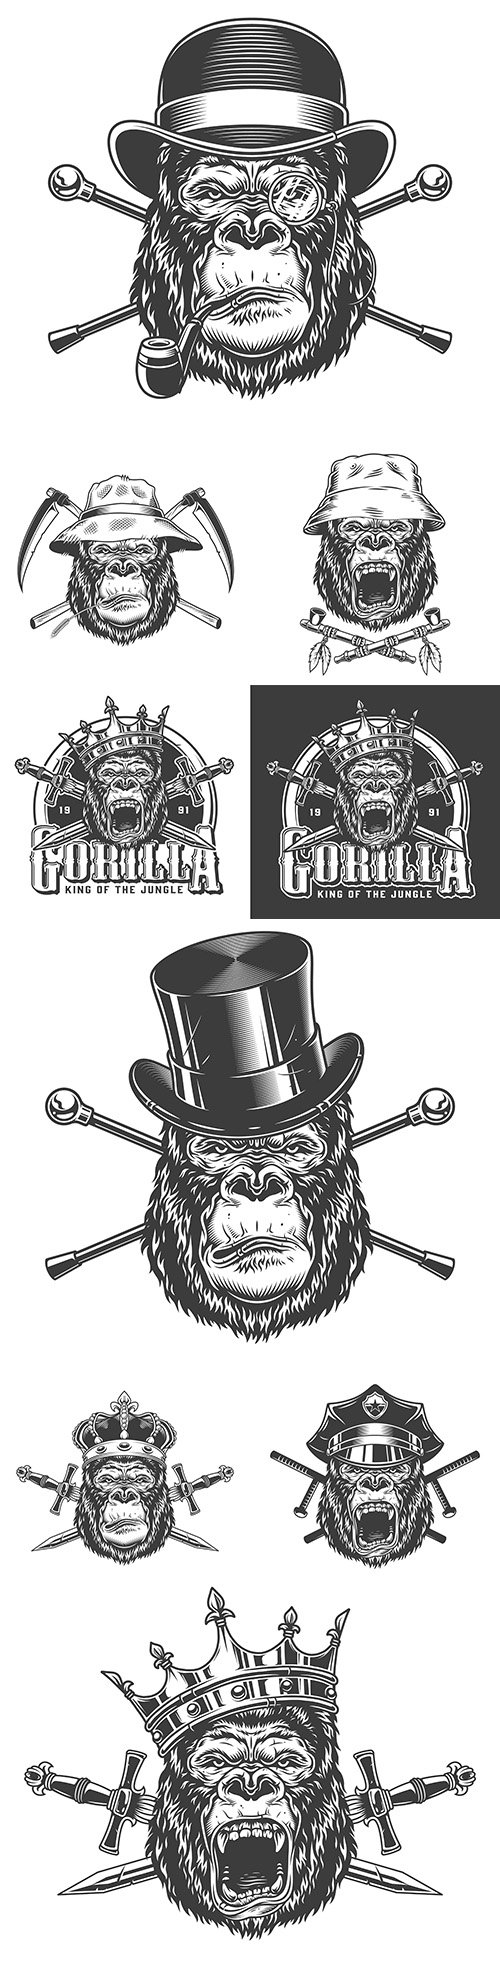 Head gorilla in hat with grunge objects design illustrations